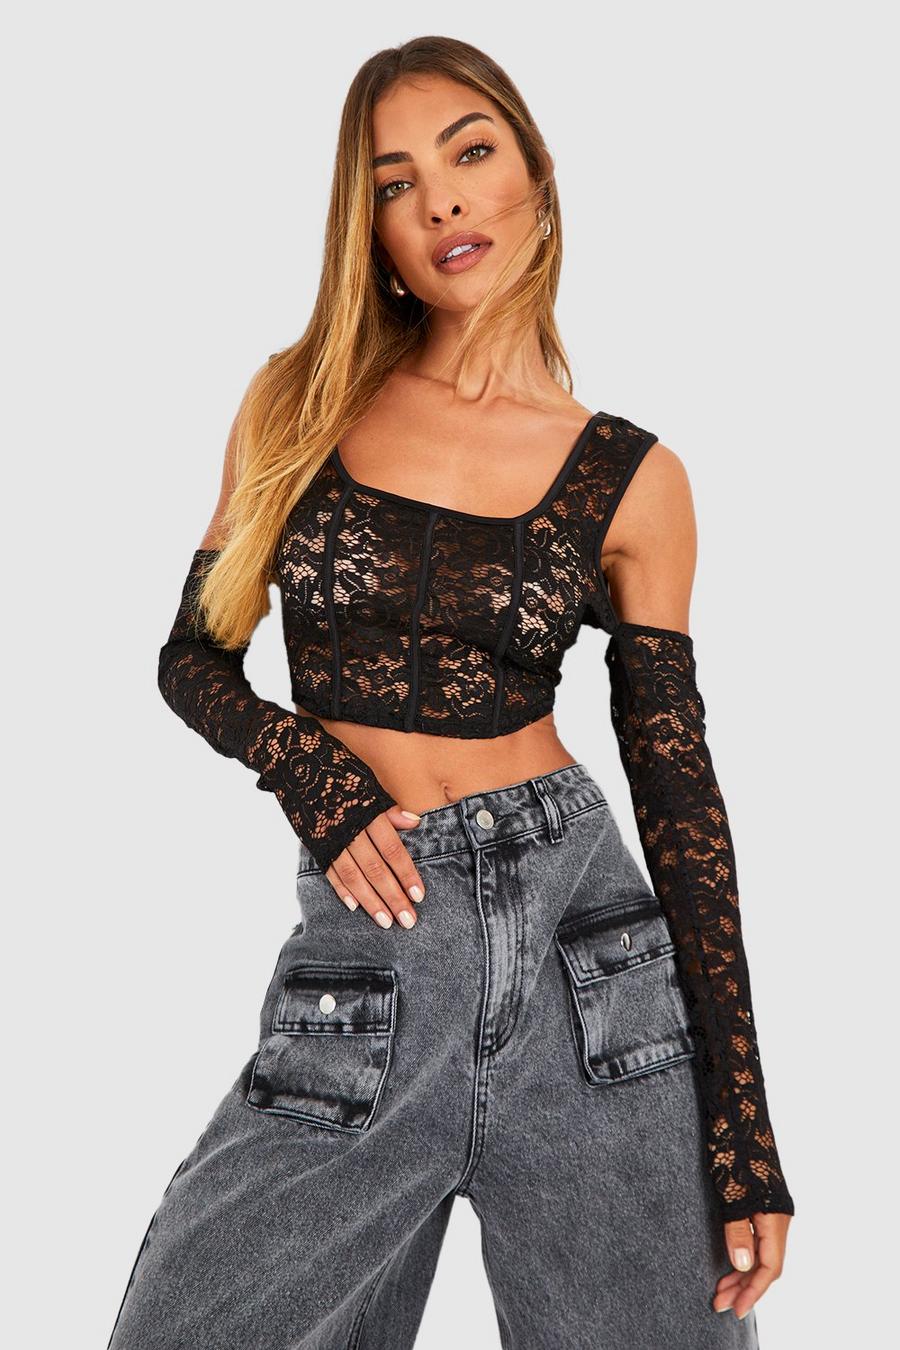 Lace Tops, Lace Tops for Women